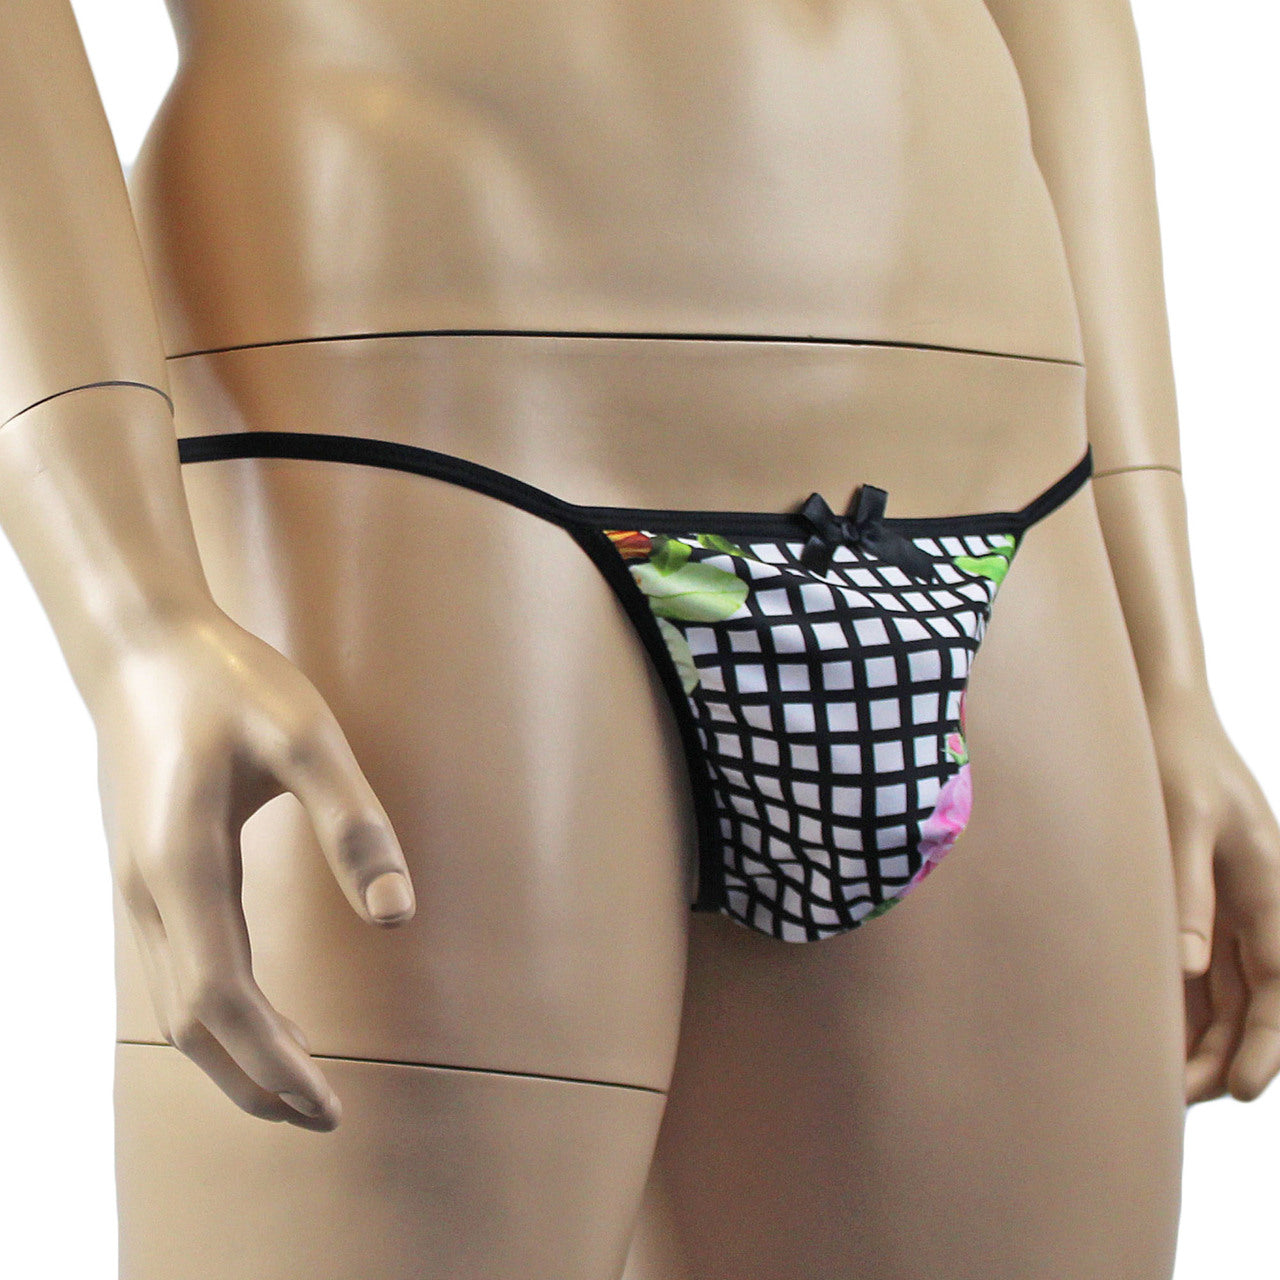 Mens G string Pouch in our Diana Flora Lattice Print